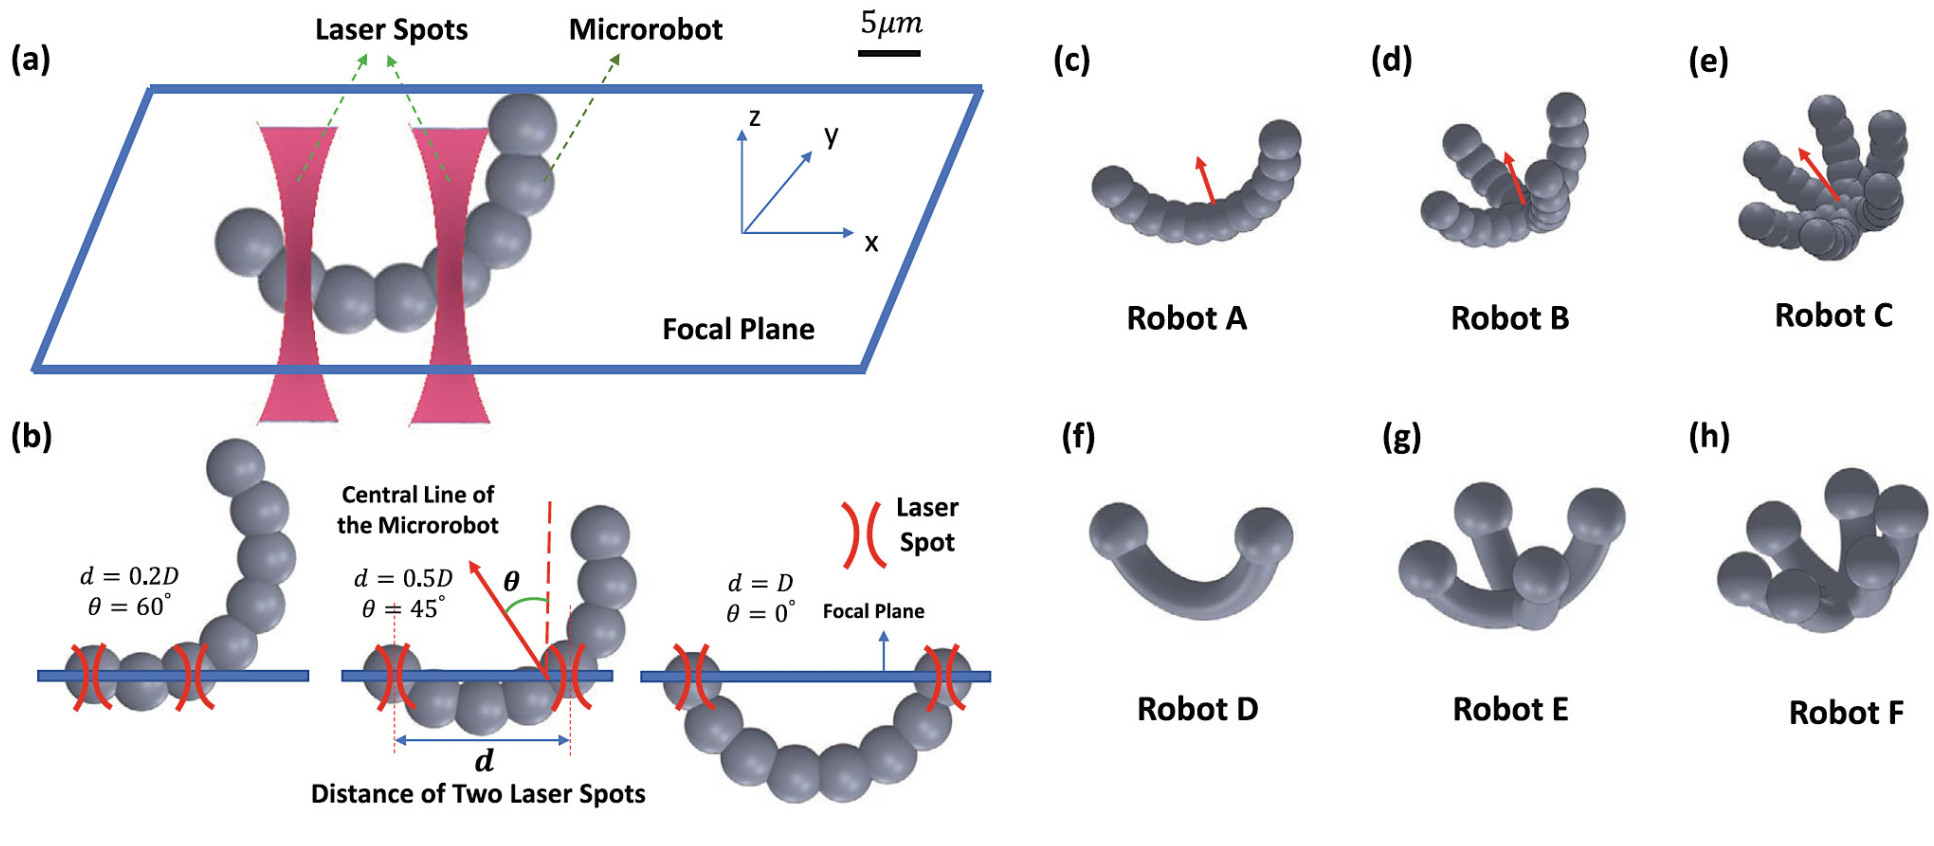 Overview of the physical mechanism and structure design for microrobot out-of-plane rotation via planar OT